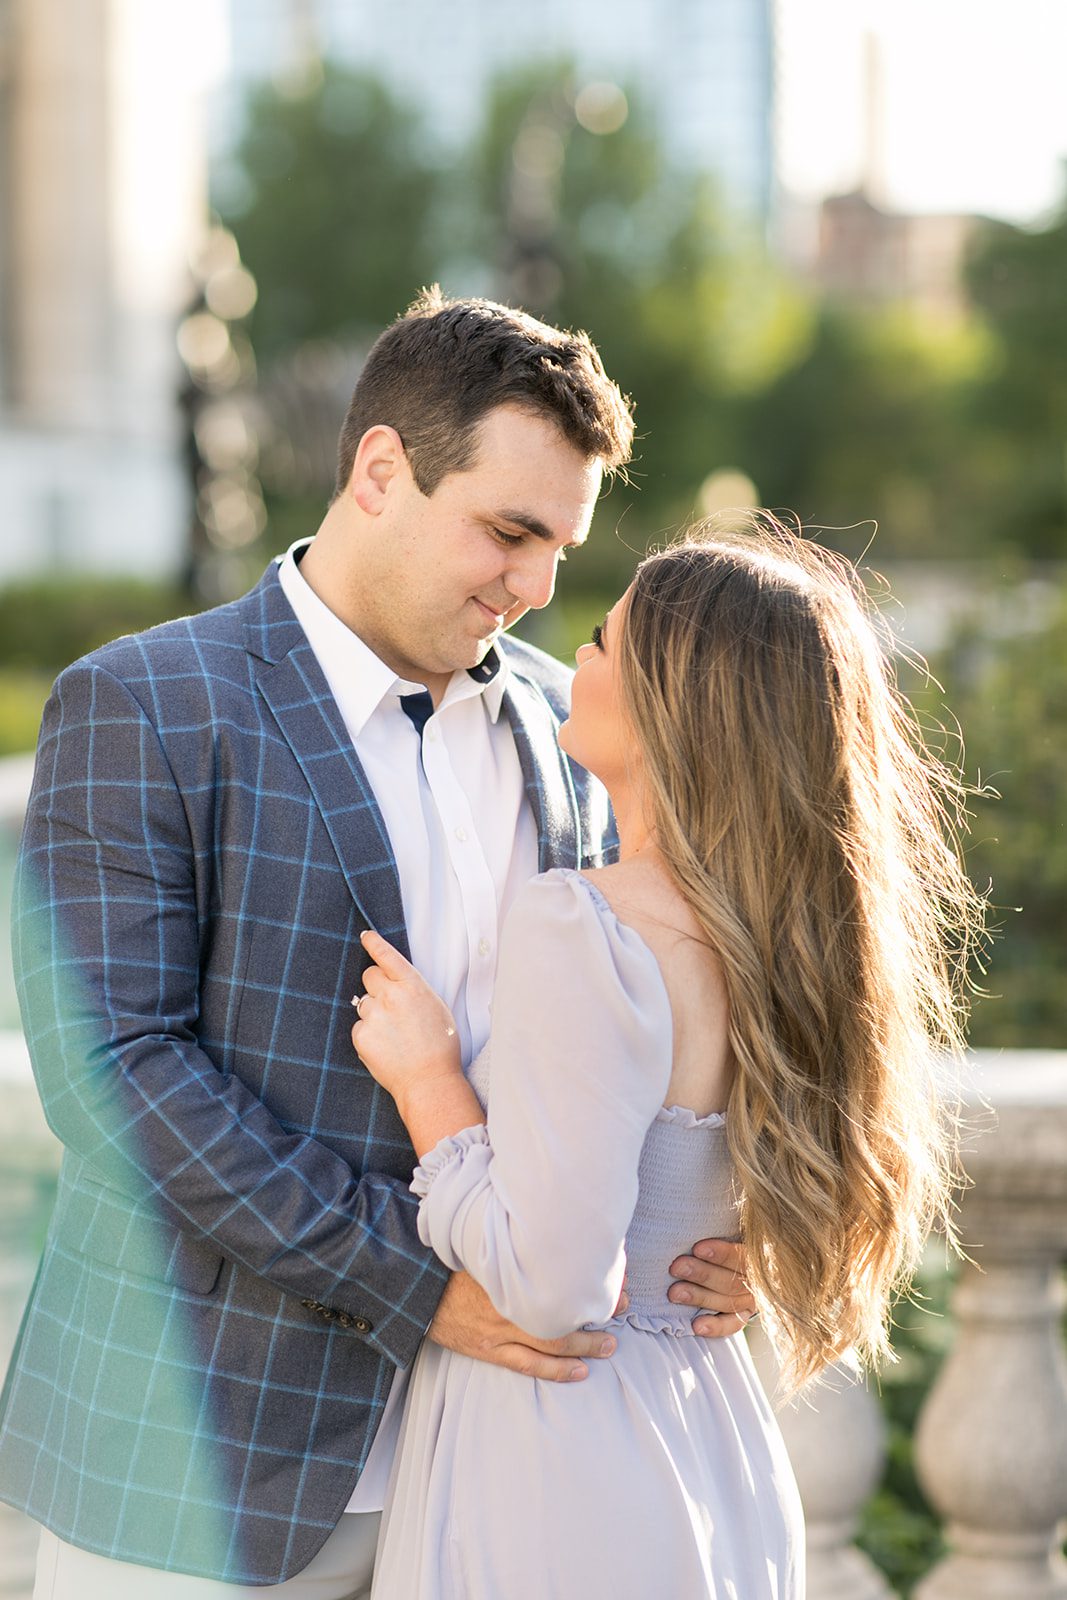 man and woman smile at each other during Chicago engagement photoshoot